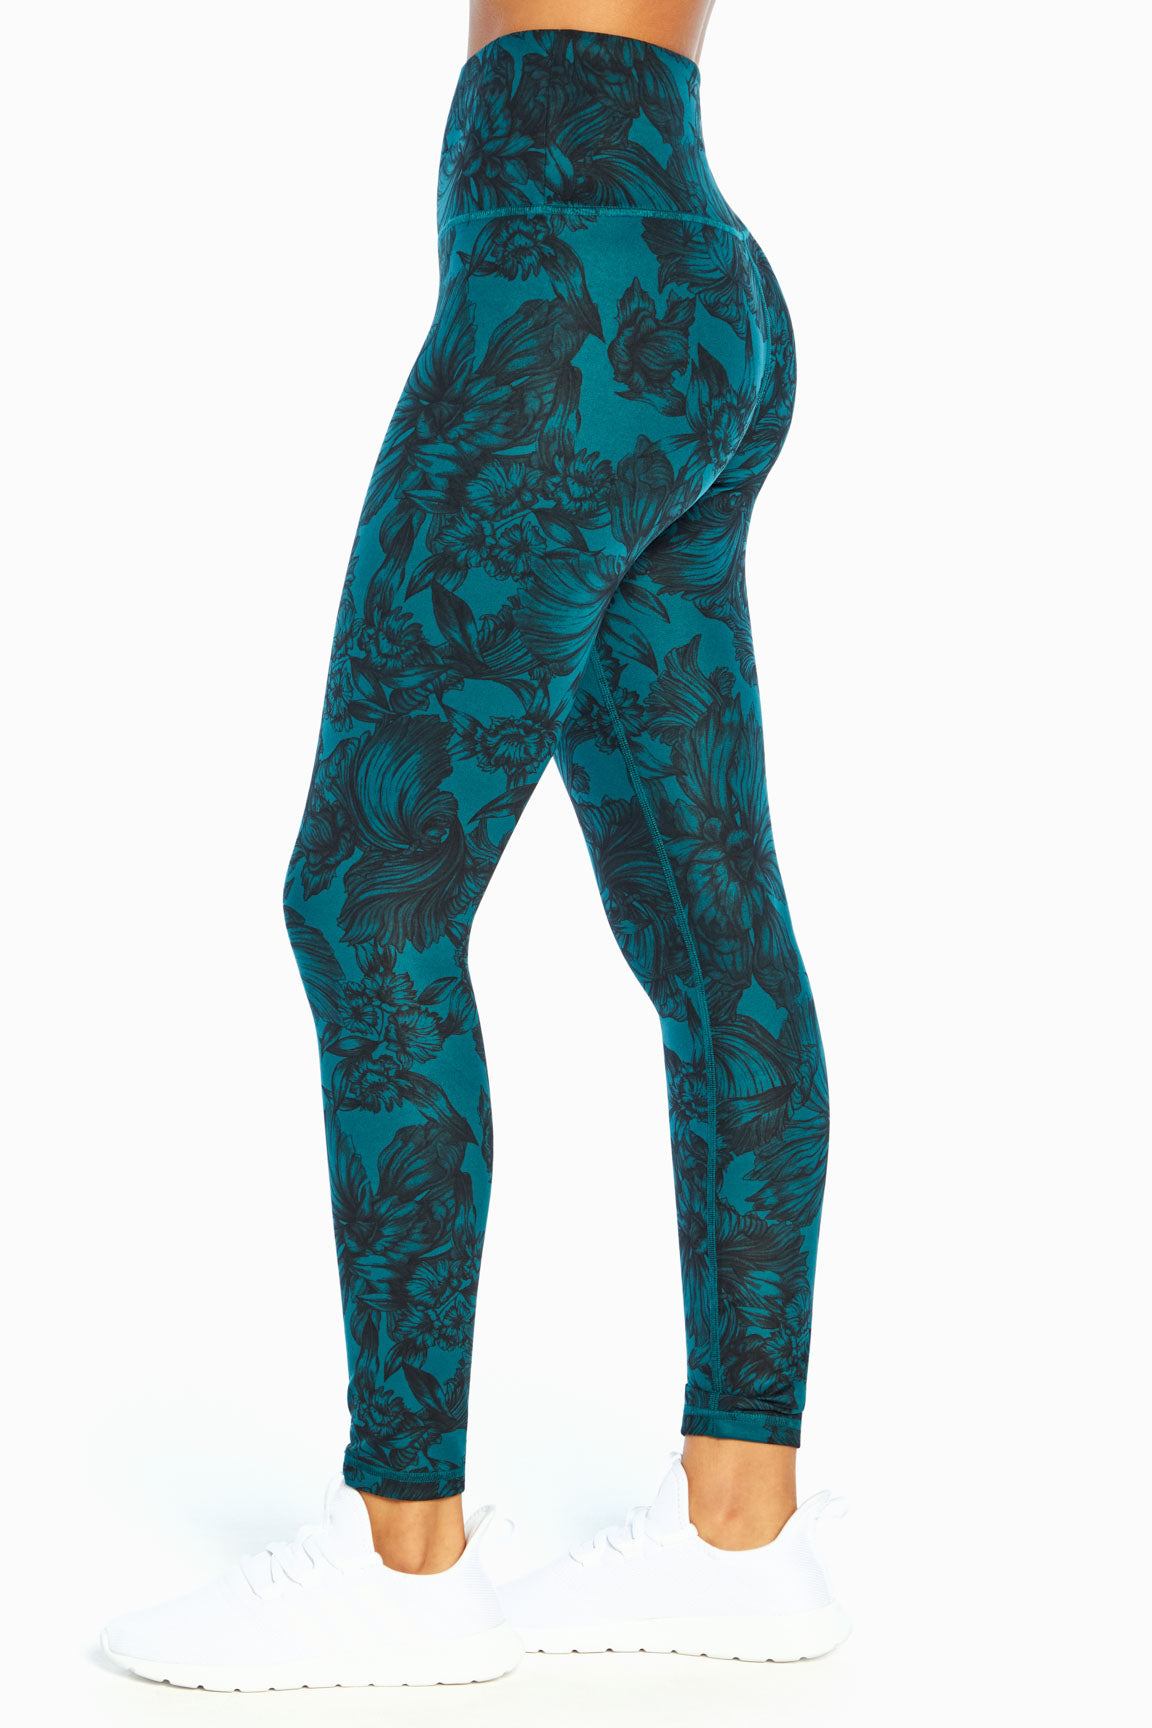 Balance Collection Valerie Strappy Yoga Leggings at